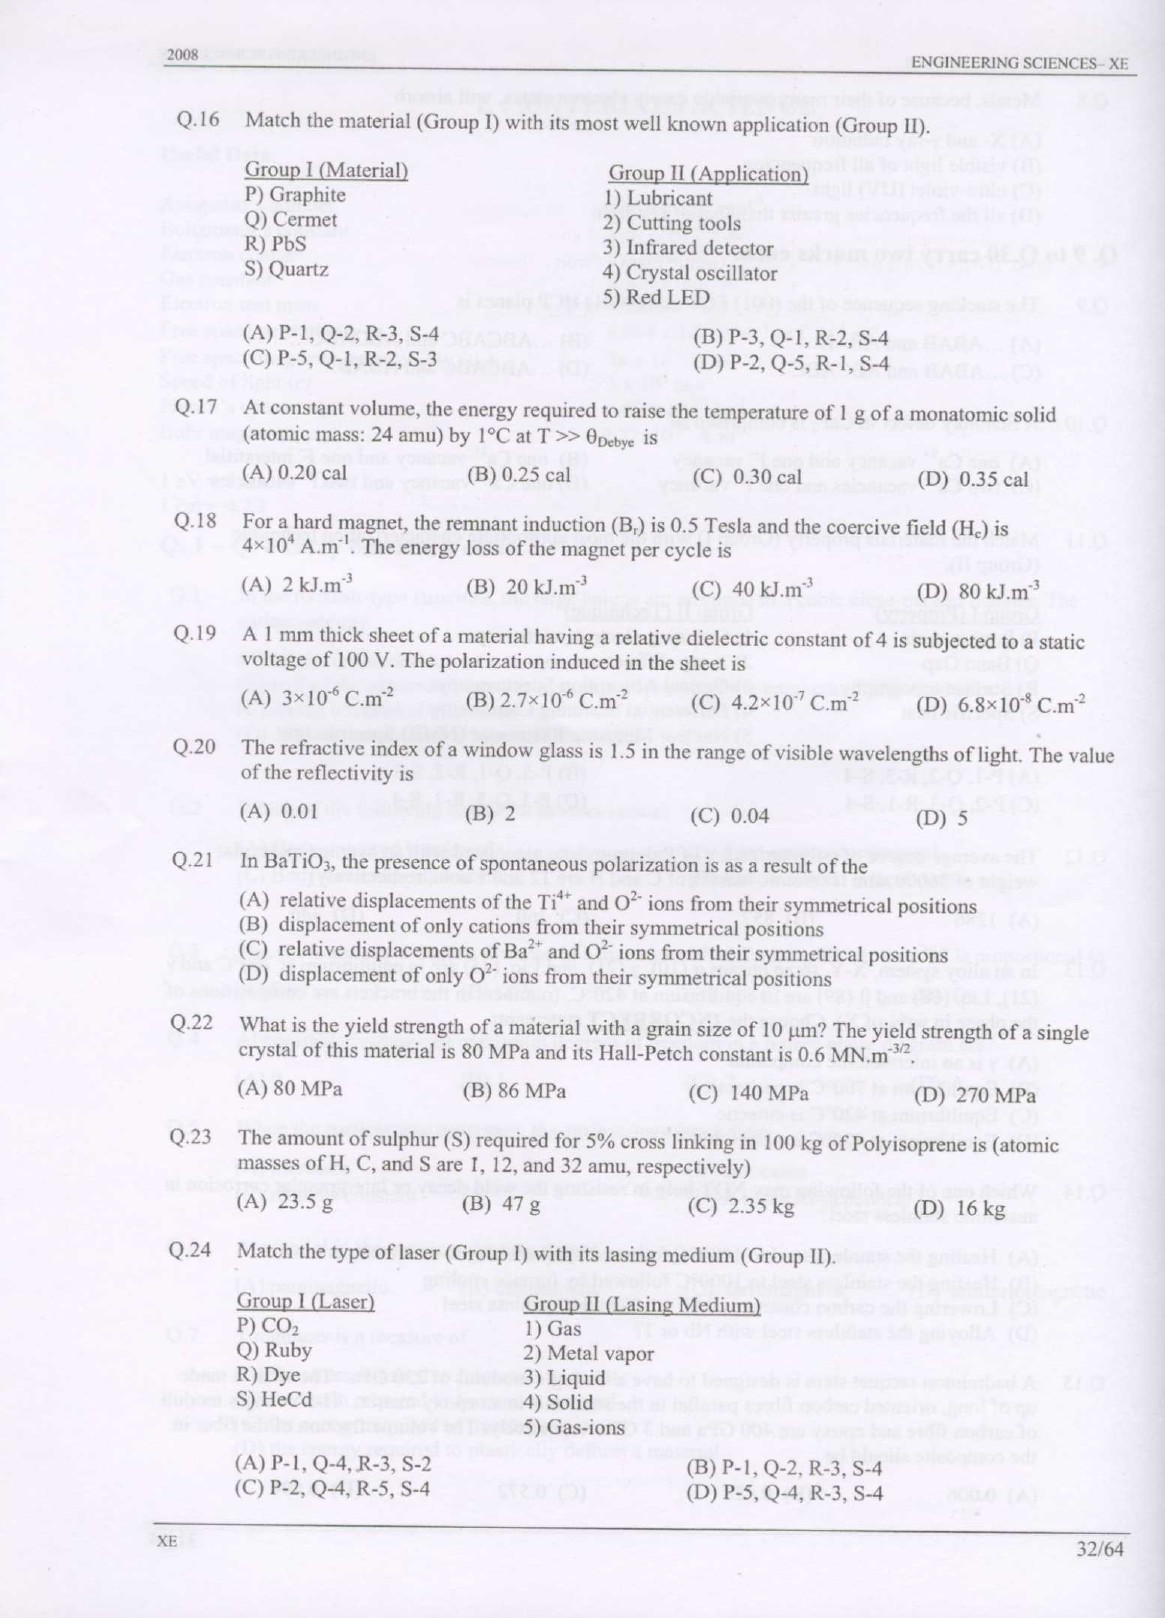 GATE Exam Question Paper 2008 Engineering Sciences 32